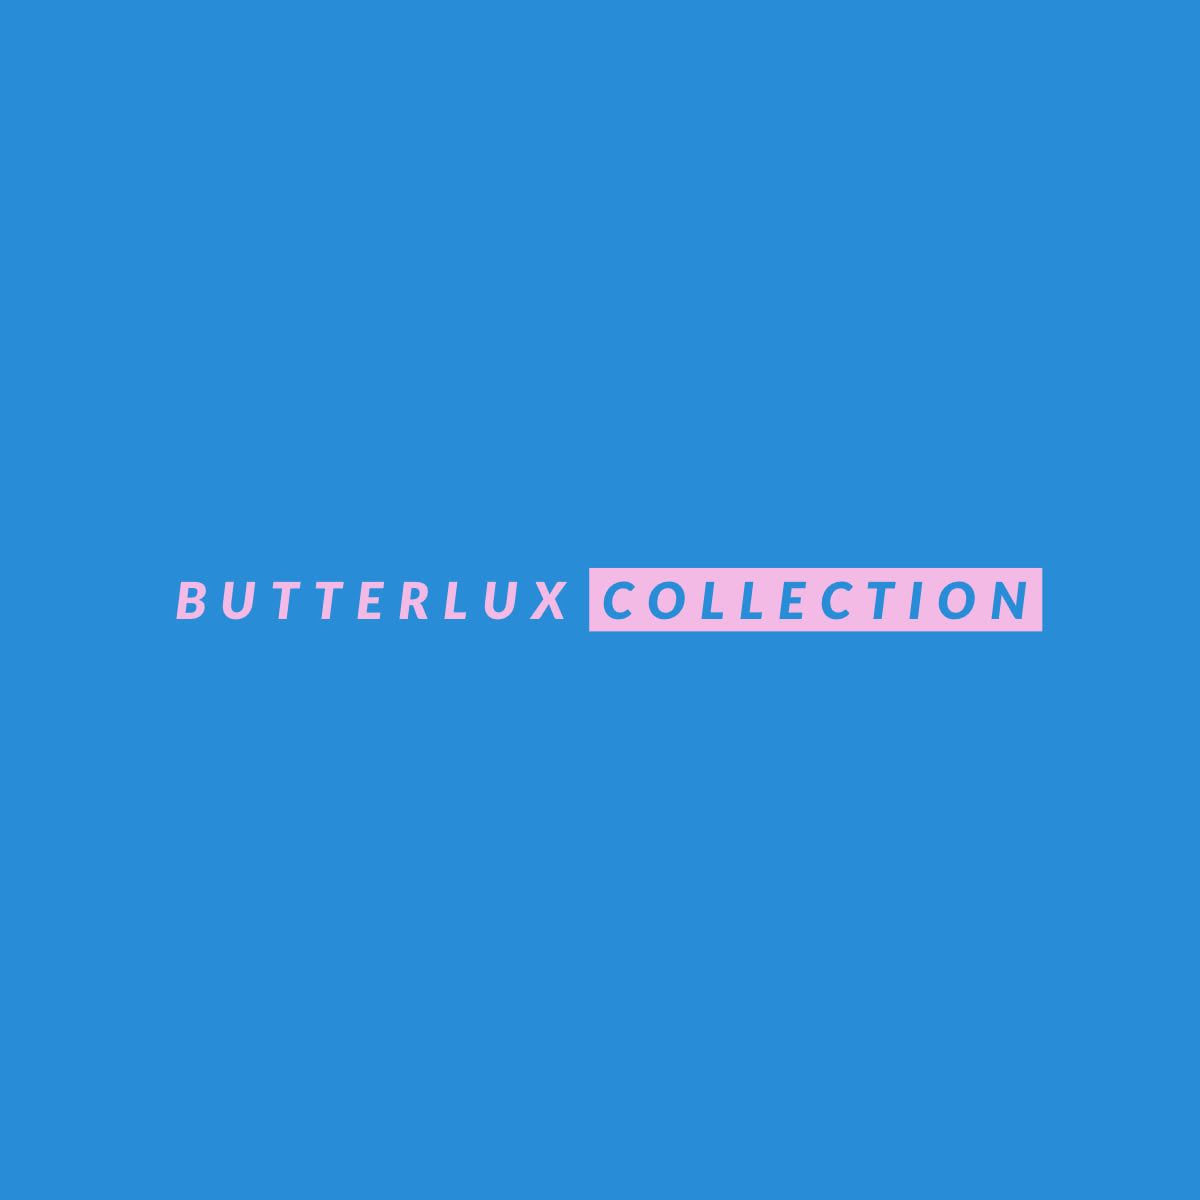 Butterlux Collection